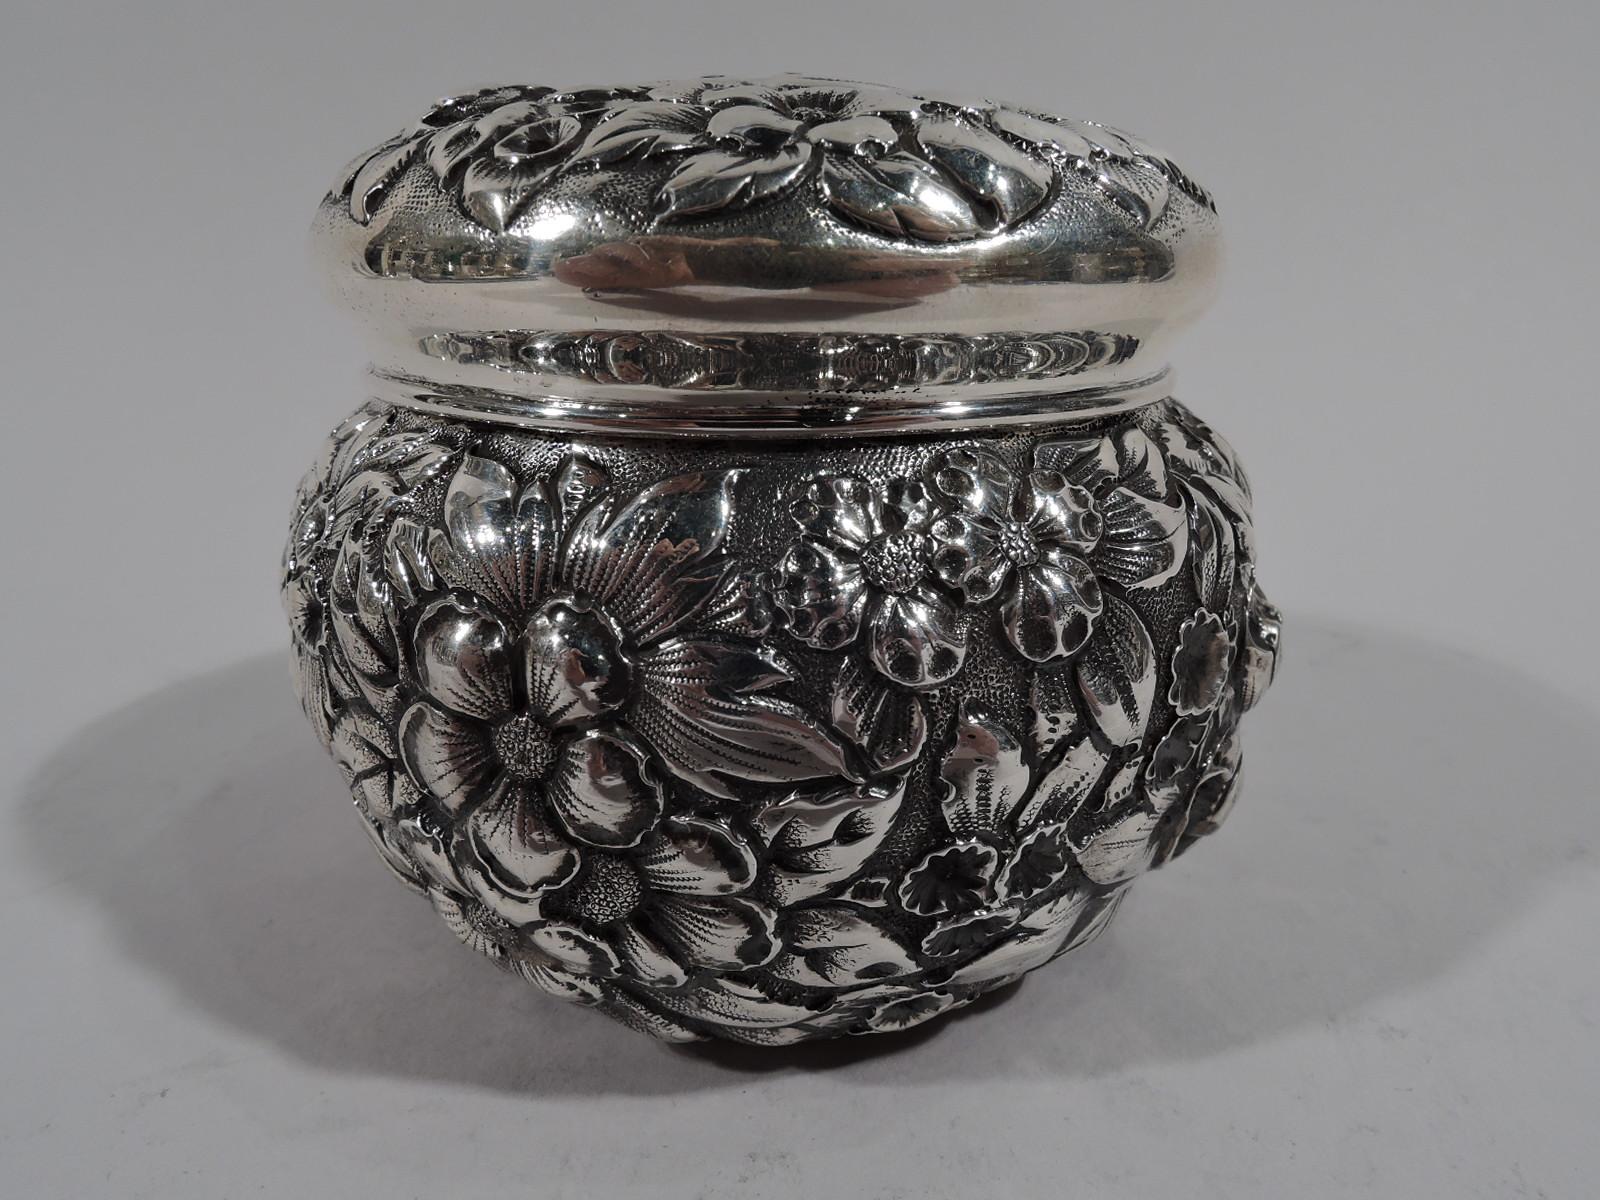 Turn-of-the-century Baltimore-style repousse sterling silver trinket box. Globular with curved and overhanging cover. Dense all-over flowers on stippled ground on sides and cover top. Cover top has central scrolled cartouche (vacant). Gilt-washed